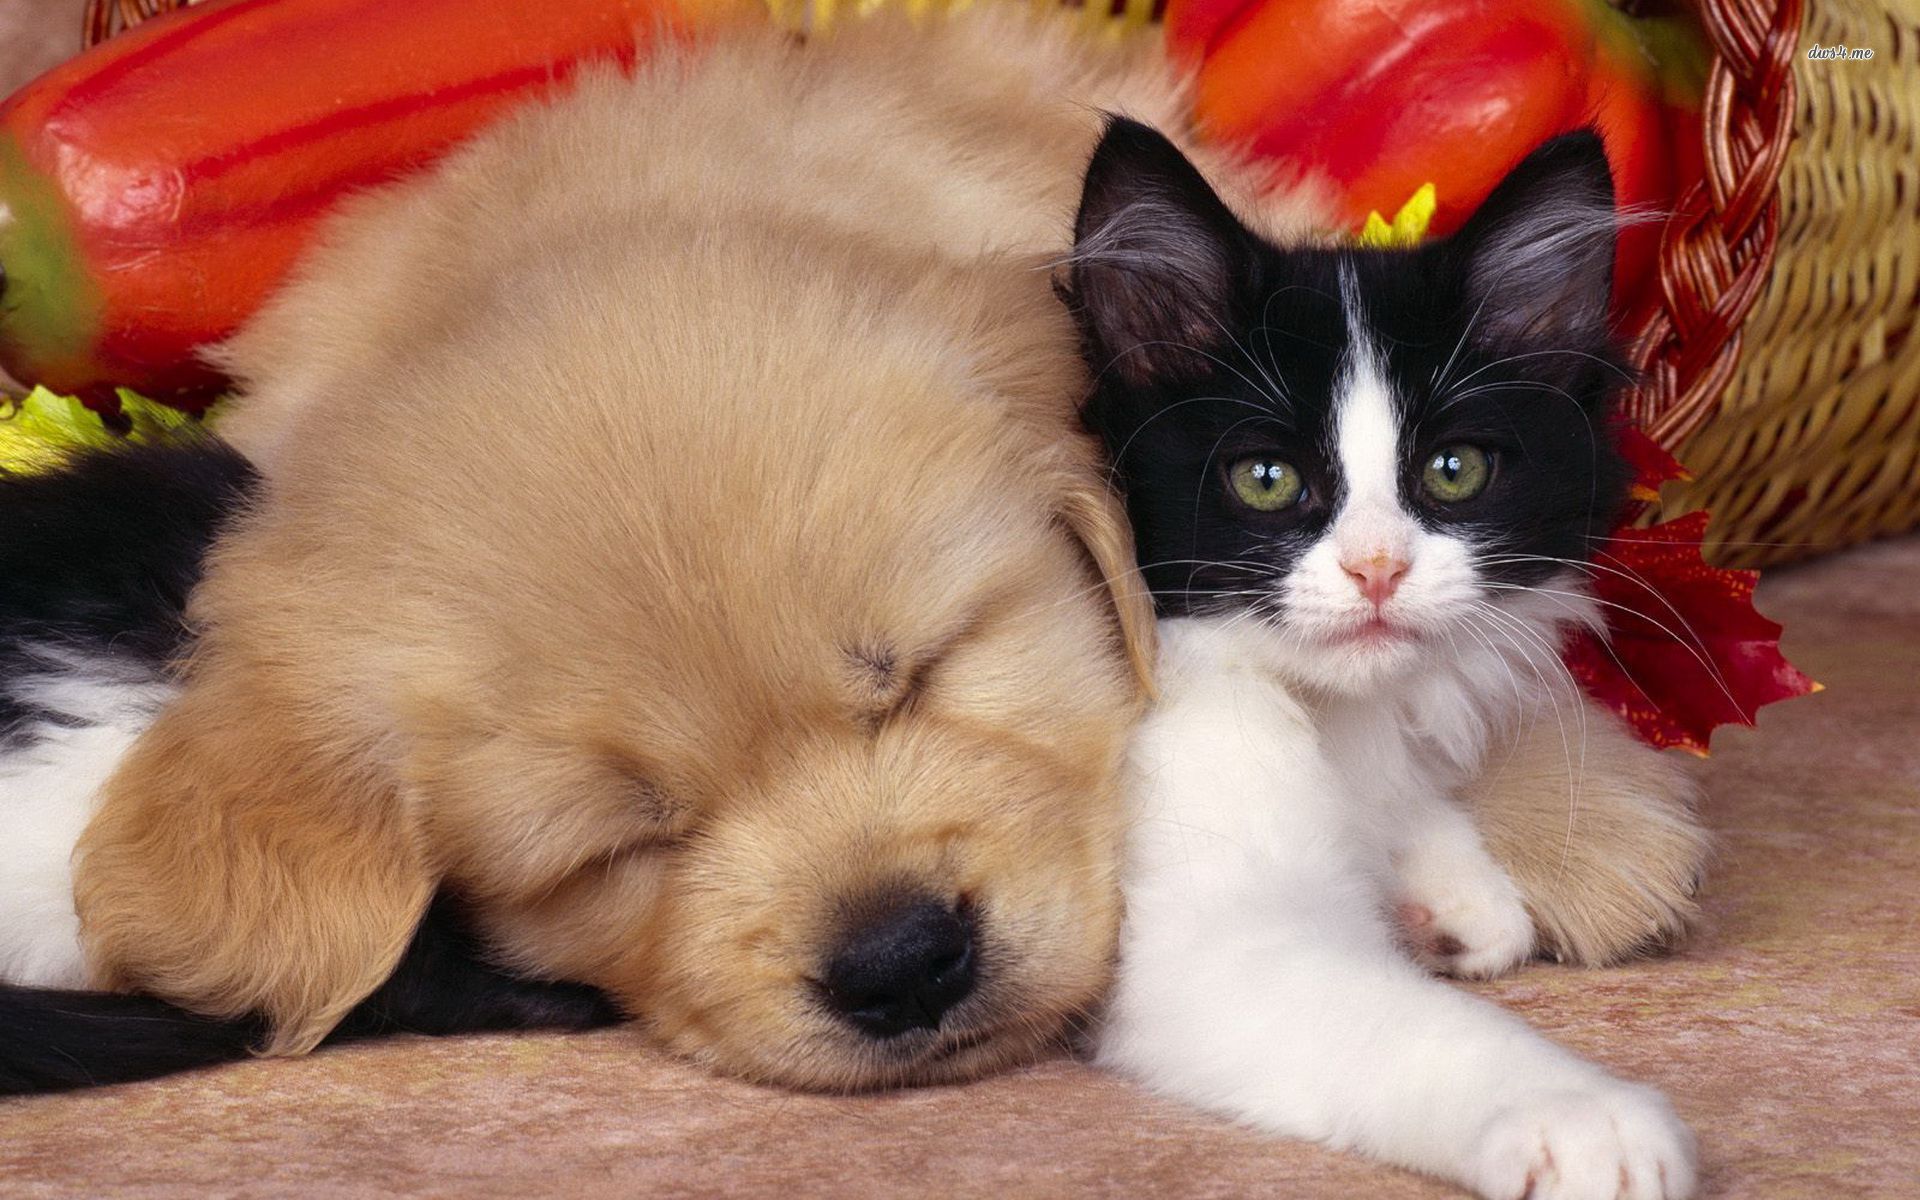 Free download Cute Dog And Cat Wallpaper Cute Dog Cat HD Wallpaper [1920x1200] for your Desktop, Mobile & Tablet. Explore Adorable Cat and Dog Wallpaper